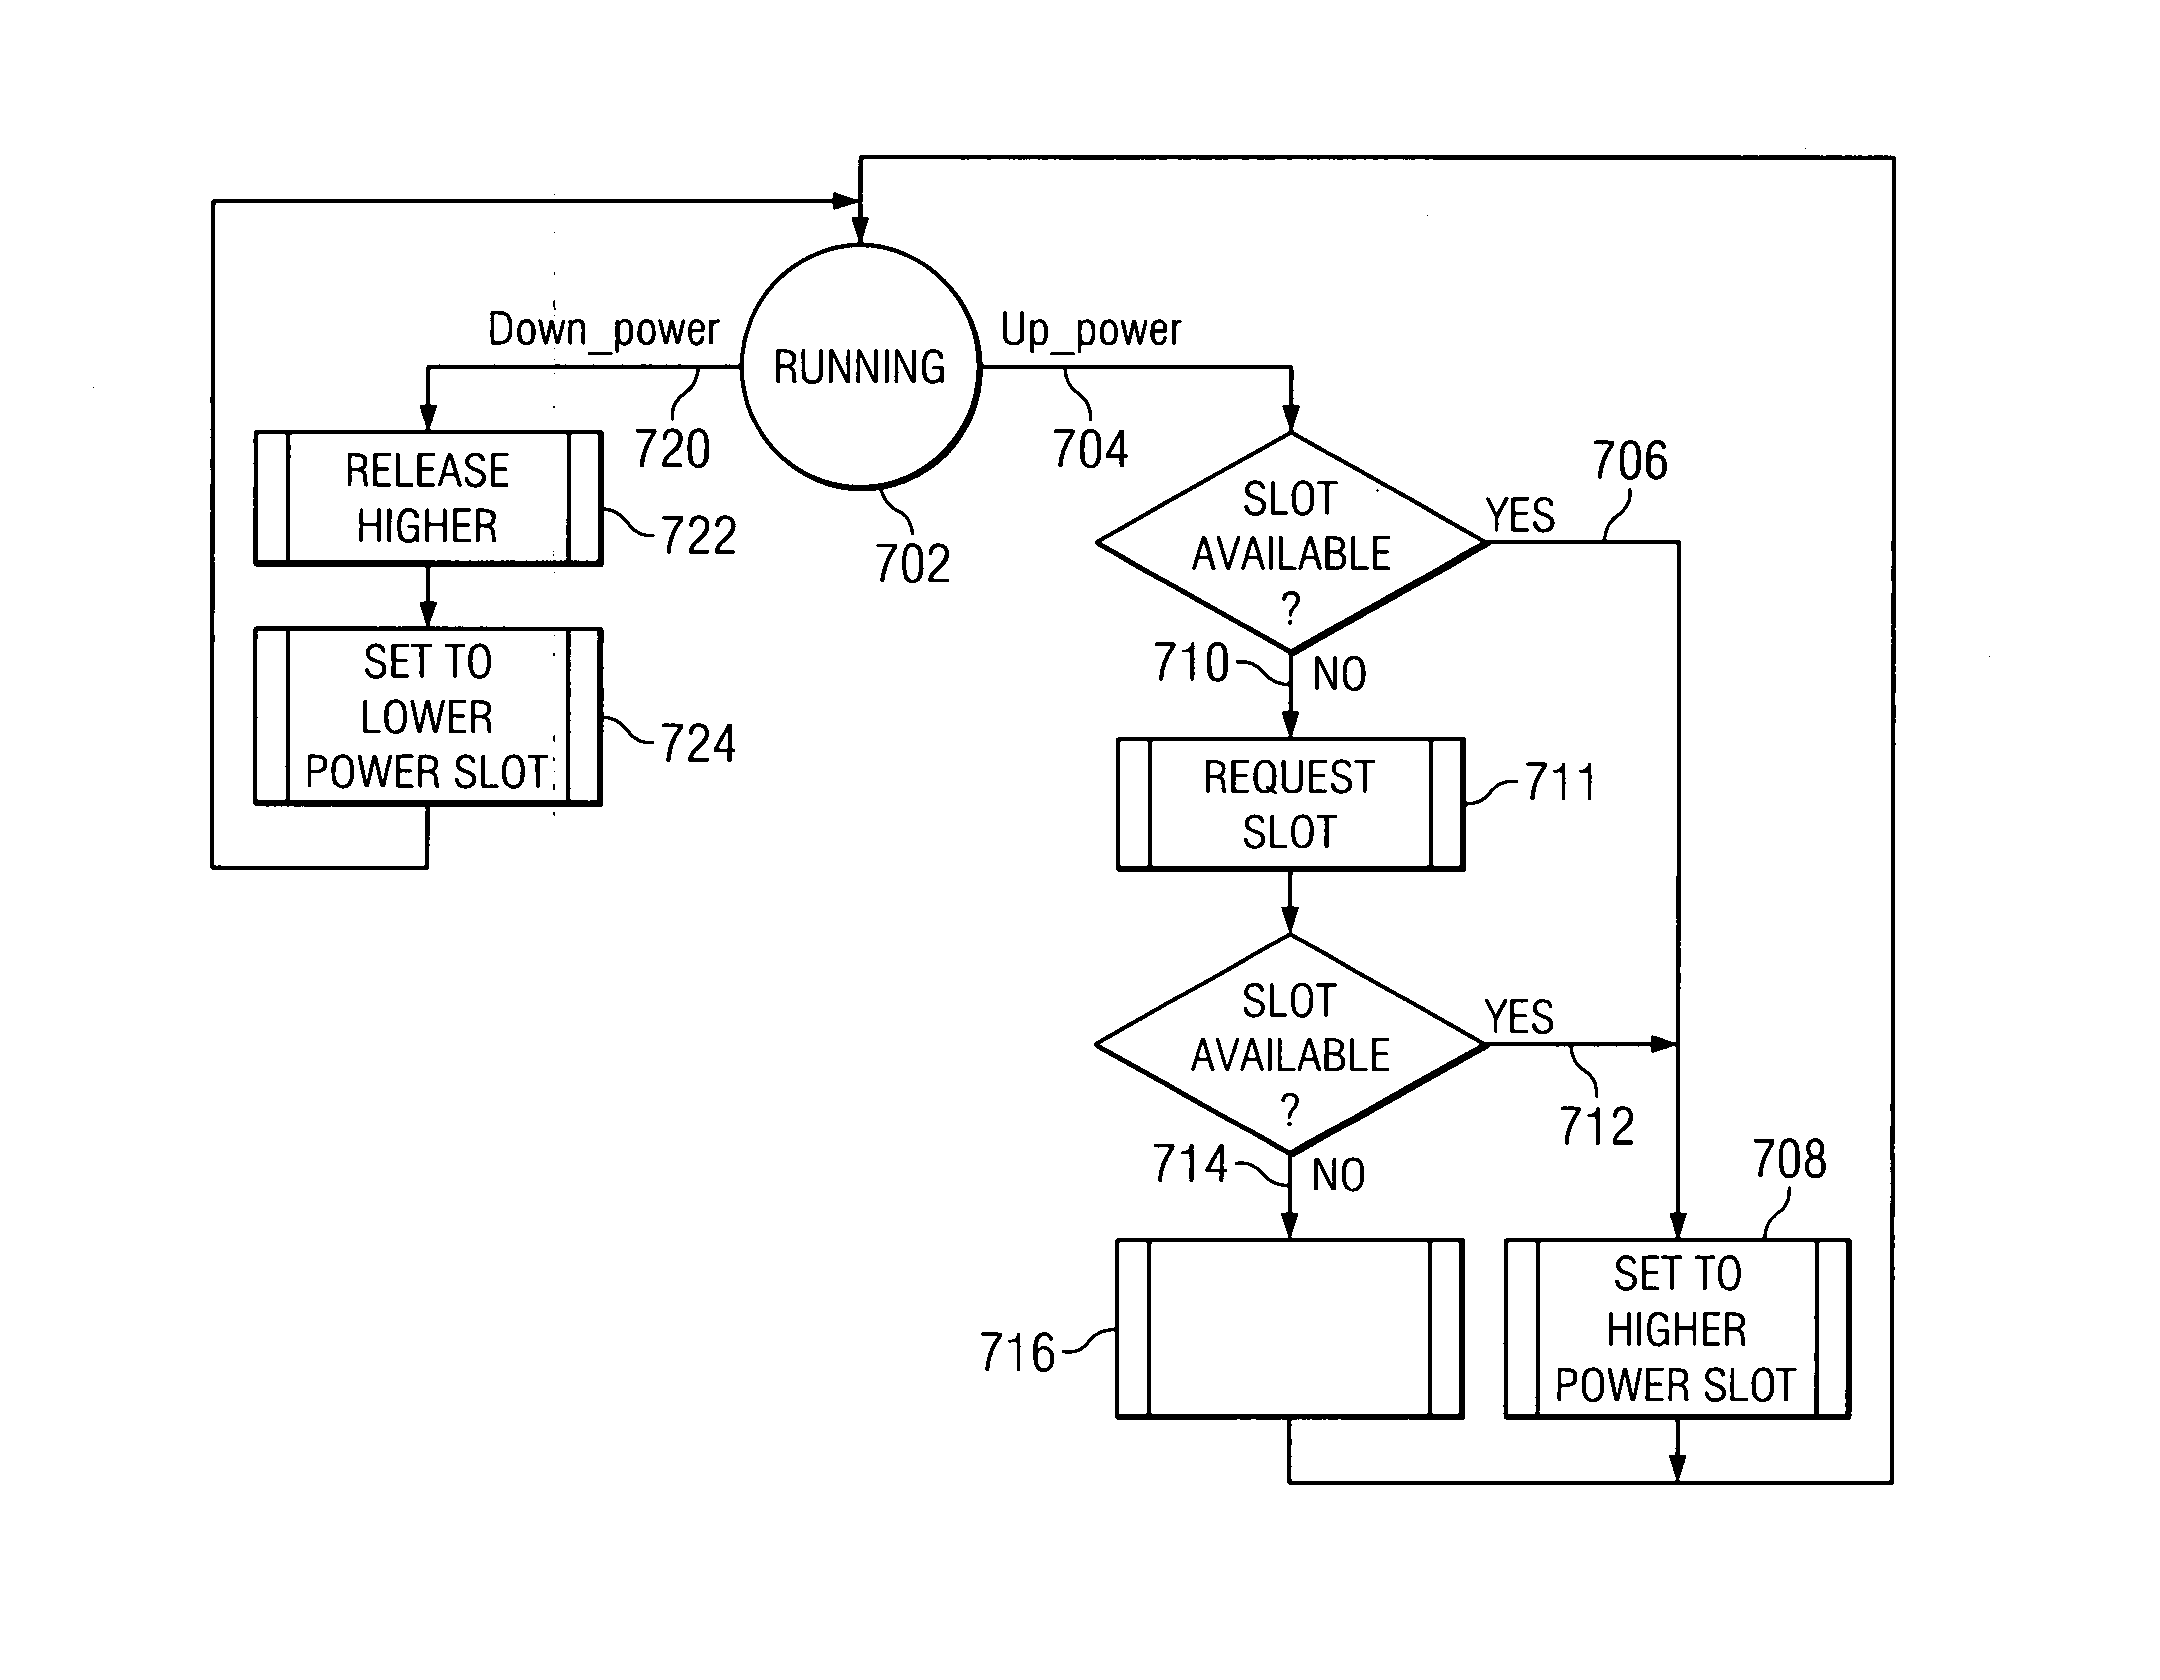 Self-monitoring and self-adjusting power consumption computer control system